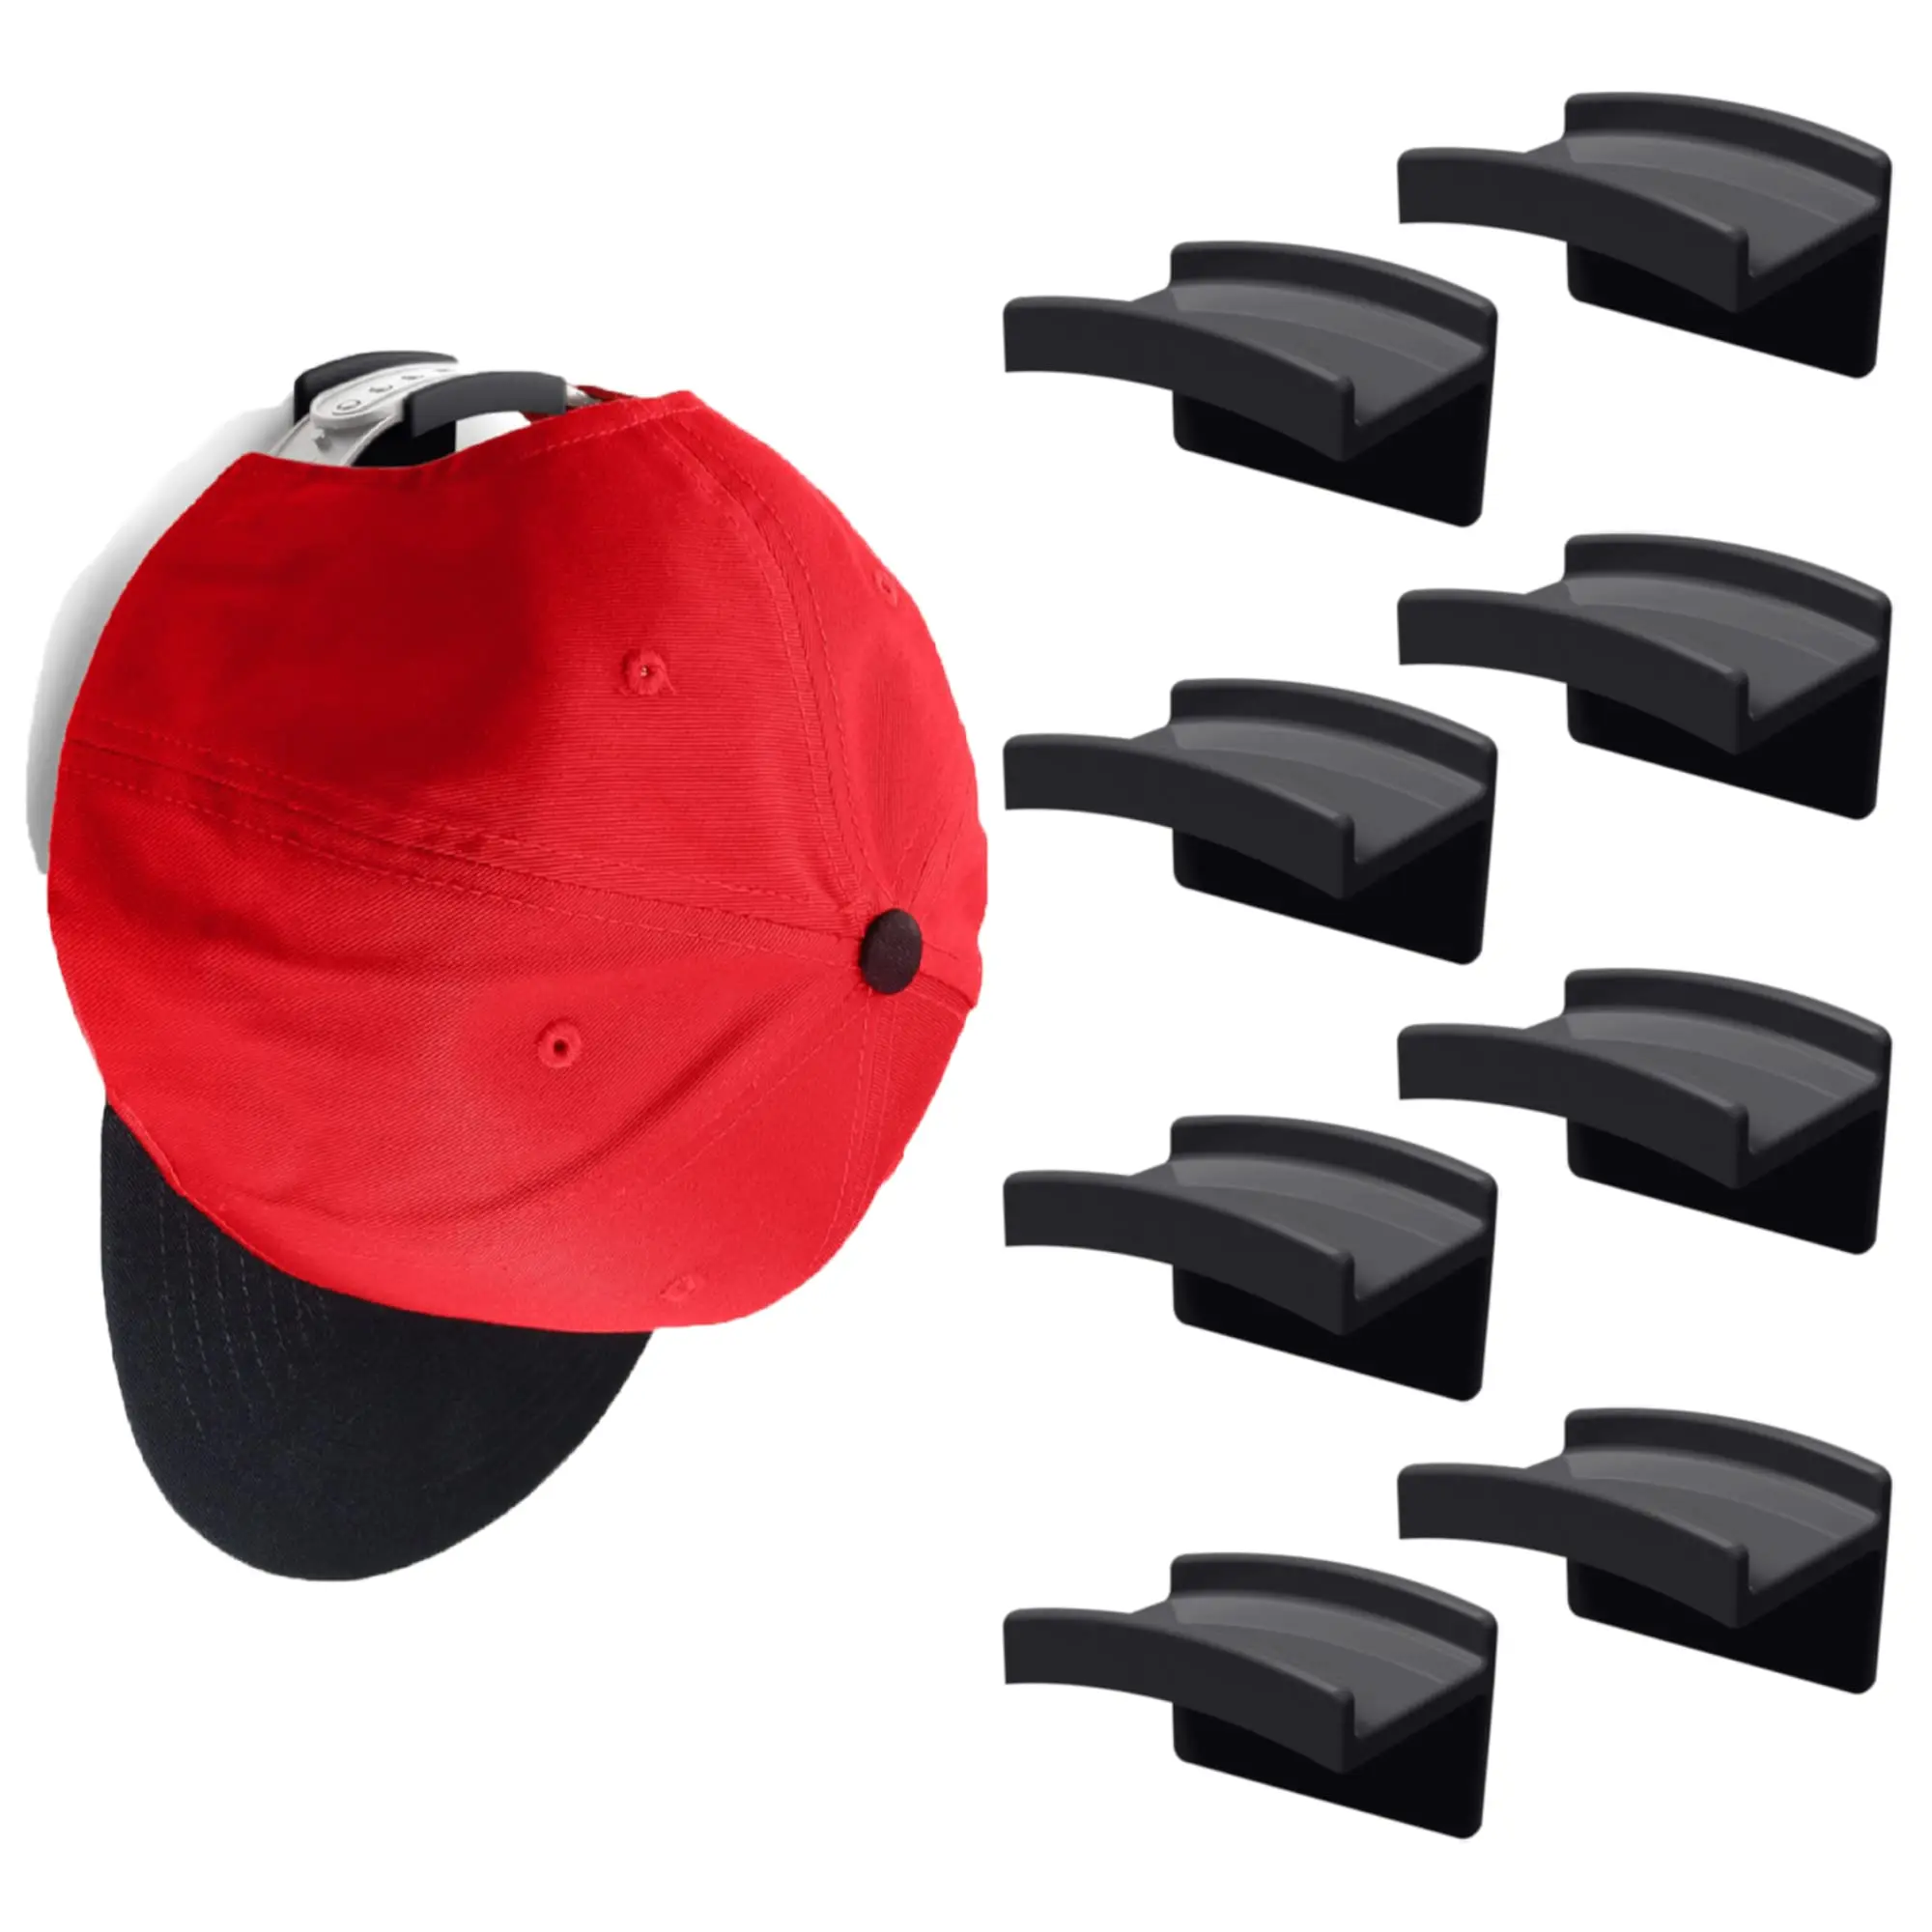 5/10PCS Adhesive Hat Hooks for Wall Hat Holder Organizer for Baseball Caps Hat Rack No Drilling Multi Purpose Strong Hat Hangers 1